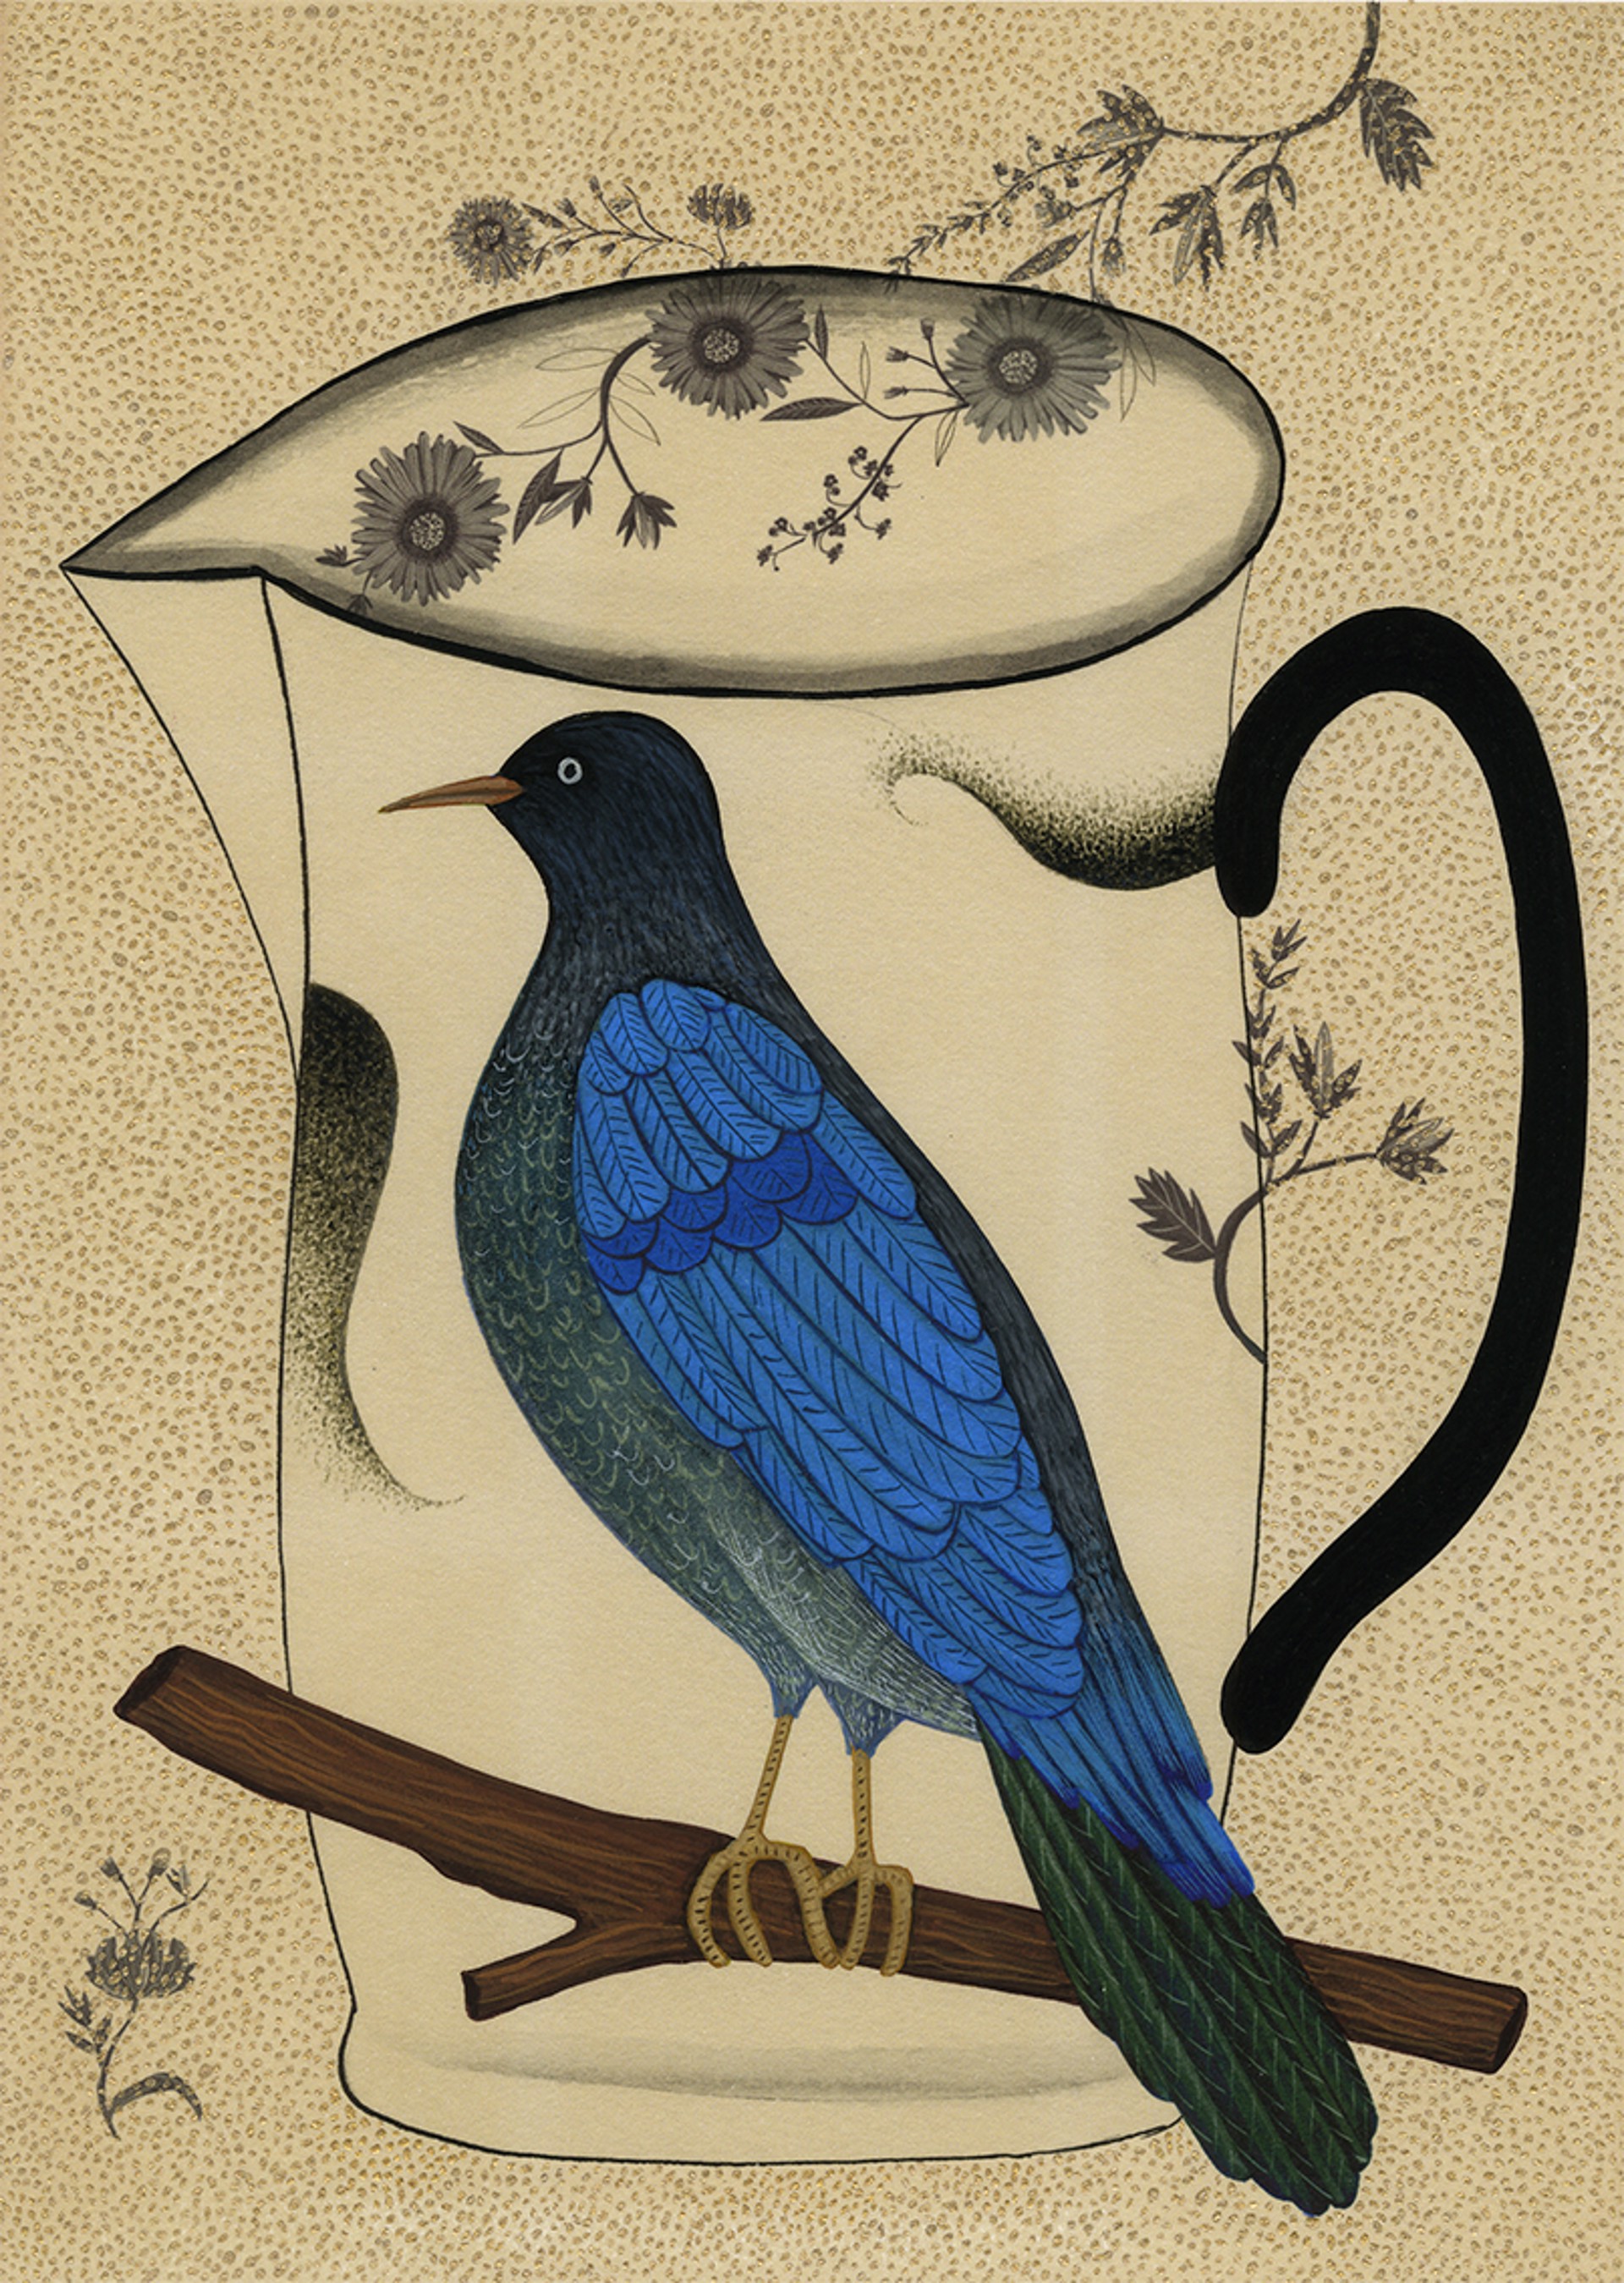 Bird and Pitcher by Anne Smith